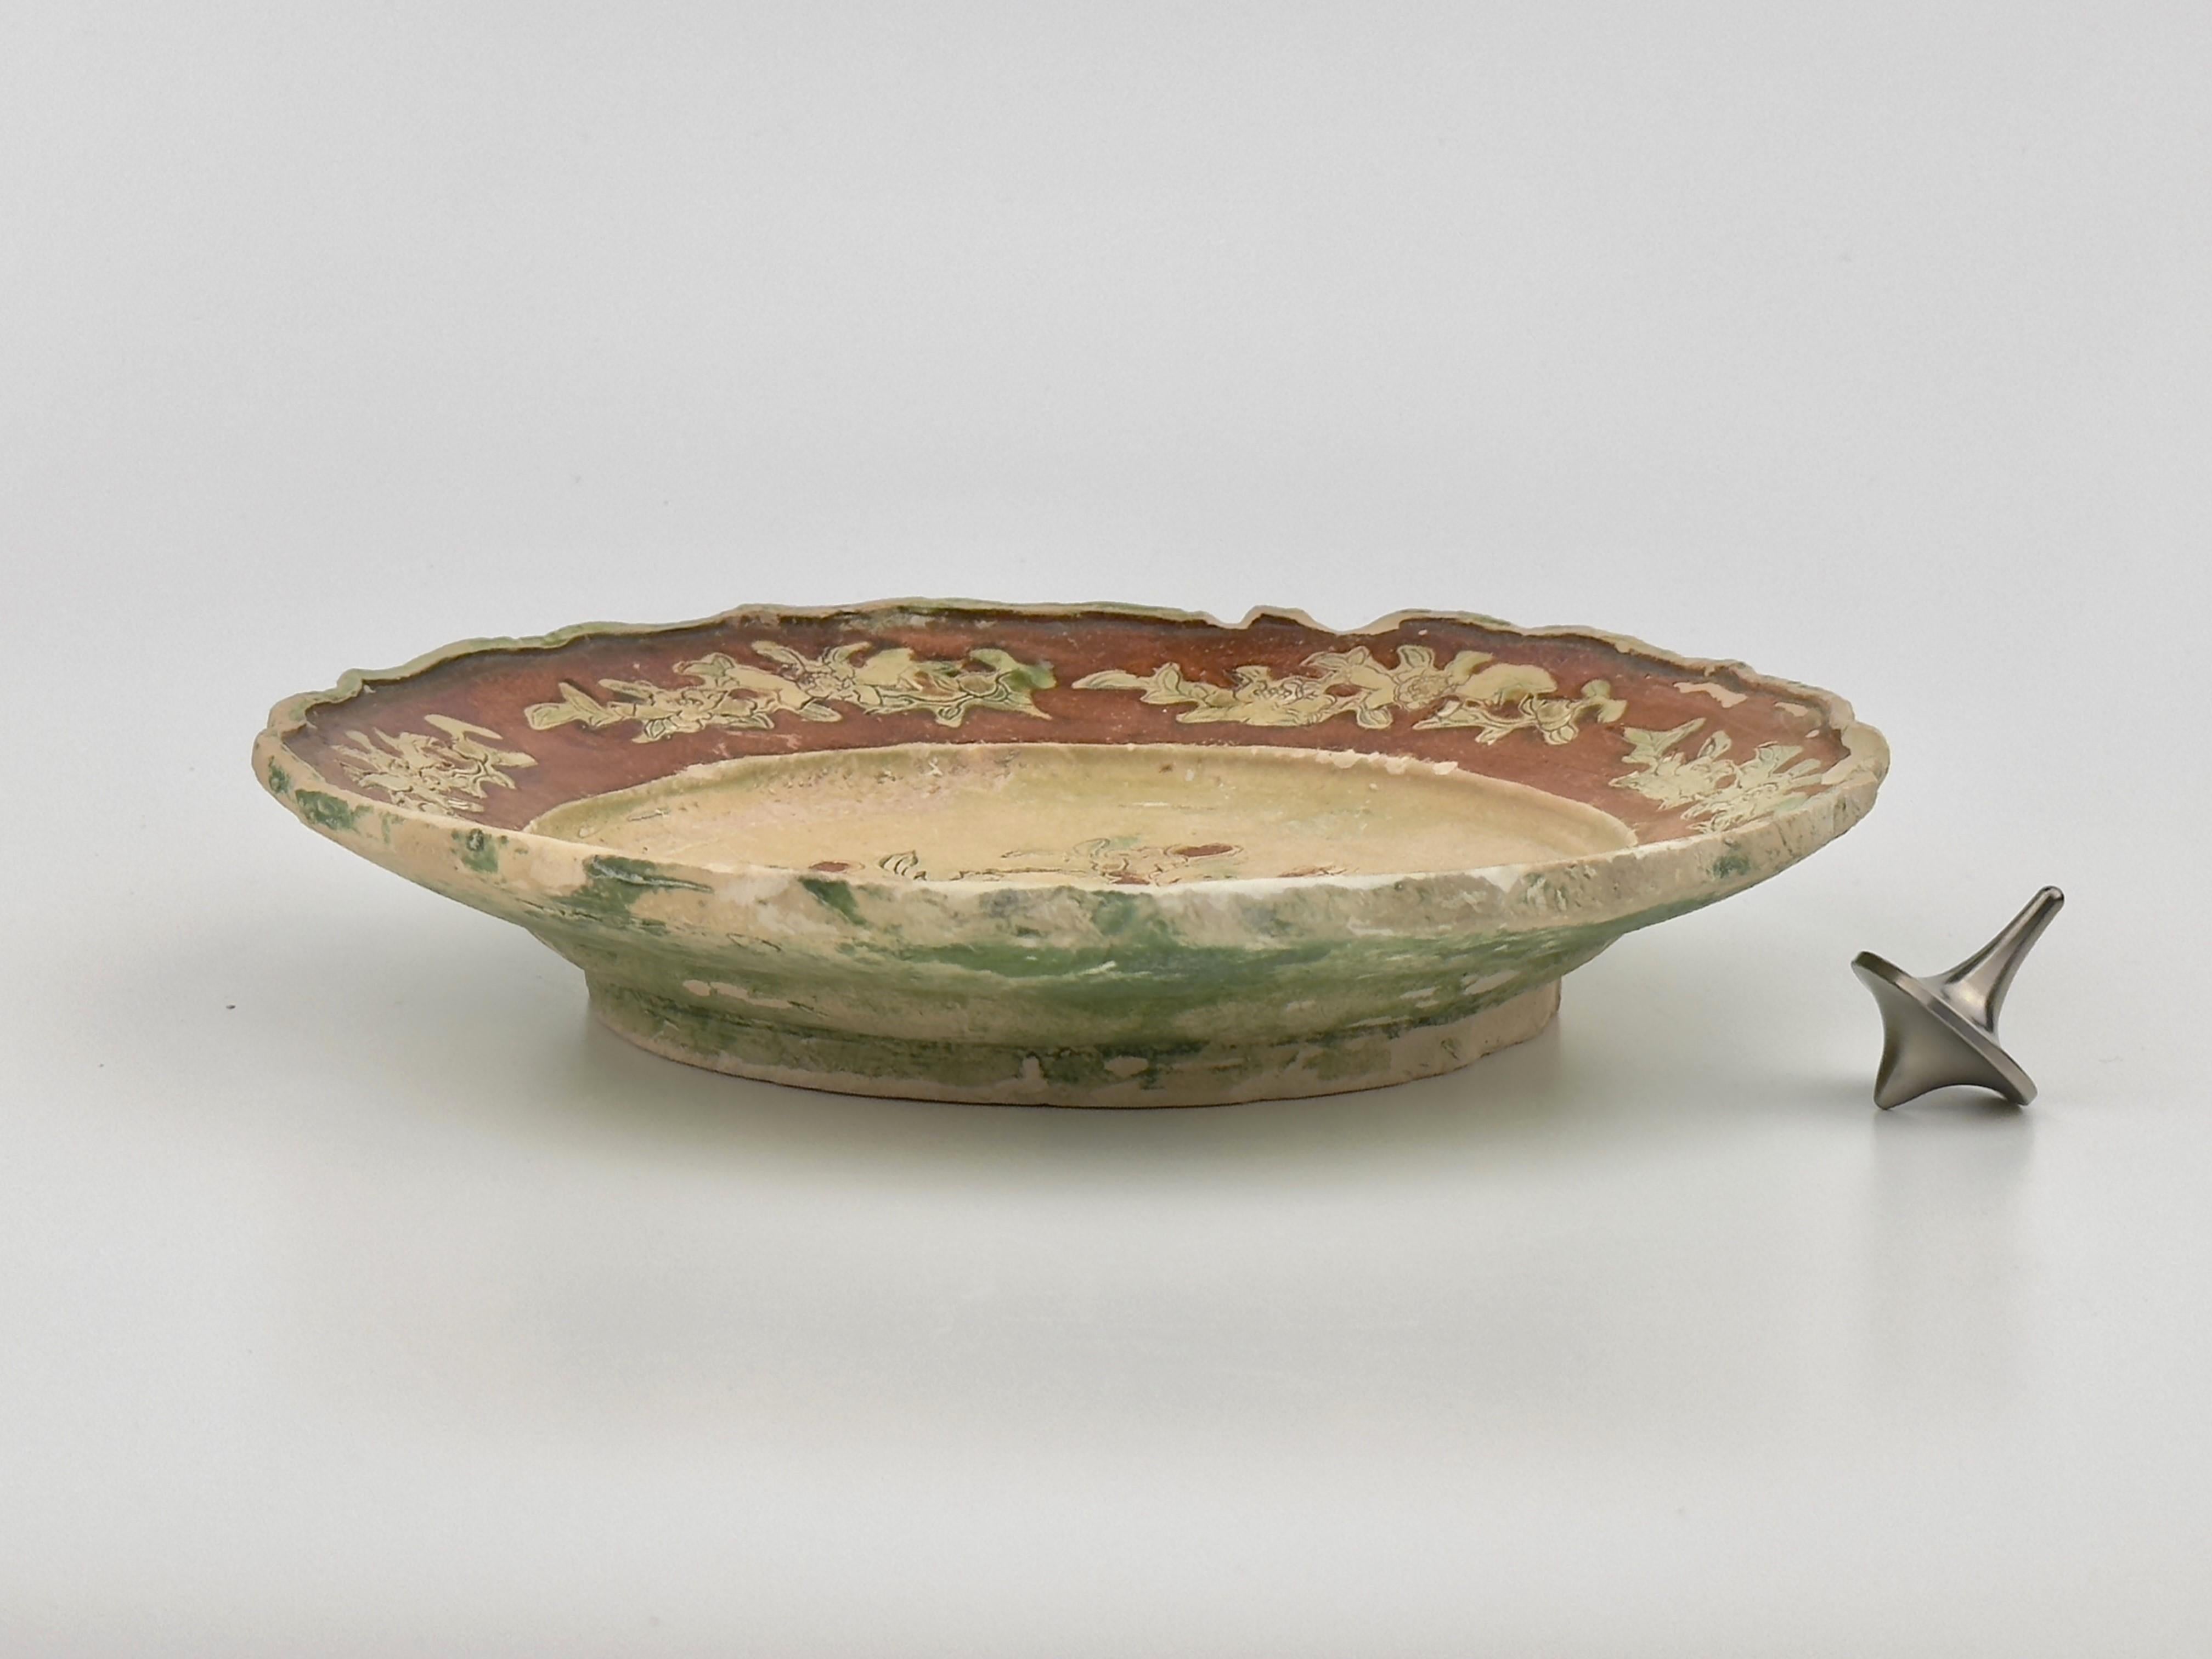 Painted with yellow, brown and green glazes against the straw-glazed ground, the cavettos with a broad brown-glazed band, the exteriors green-glazed.

Period : Qing Dynasty, Yongzheng Period
Production Date : C 1725
Made in : Jingdezhen
Destination